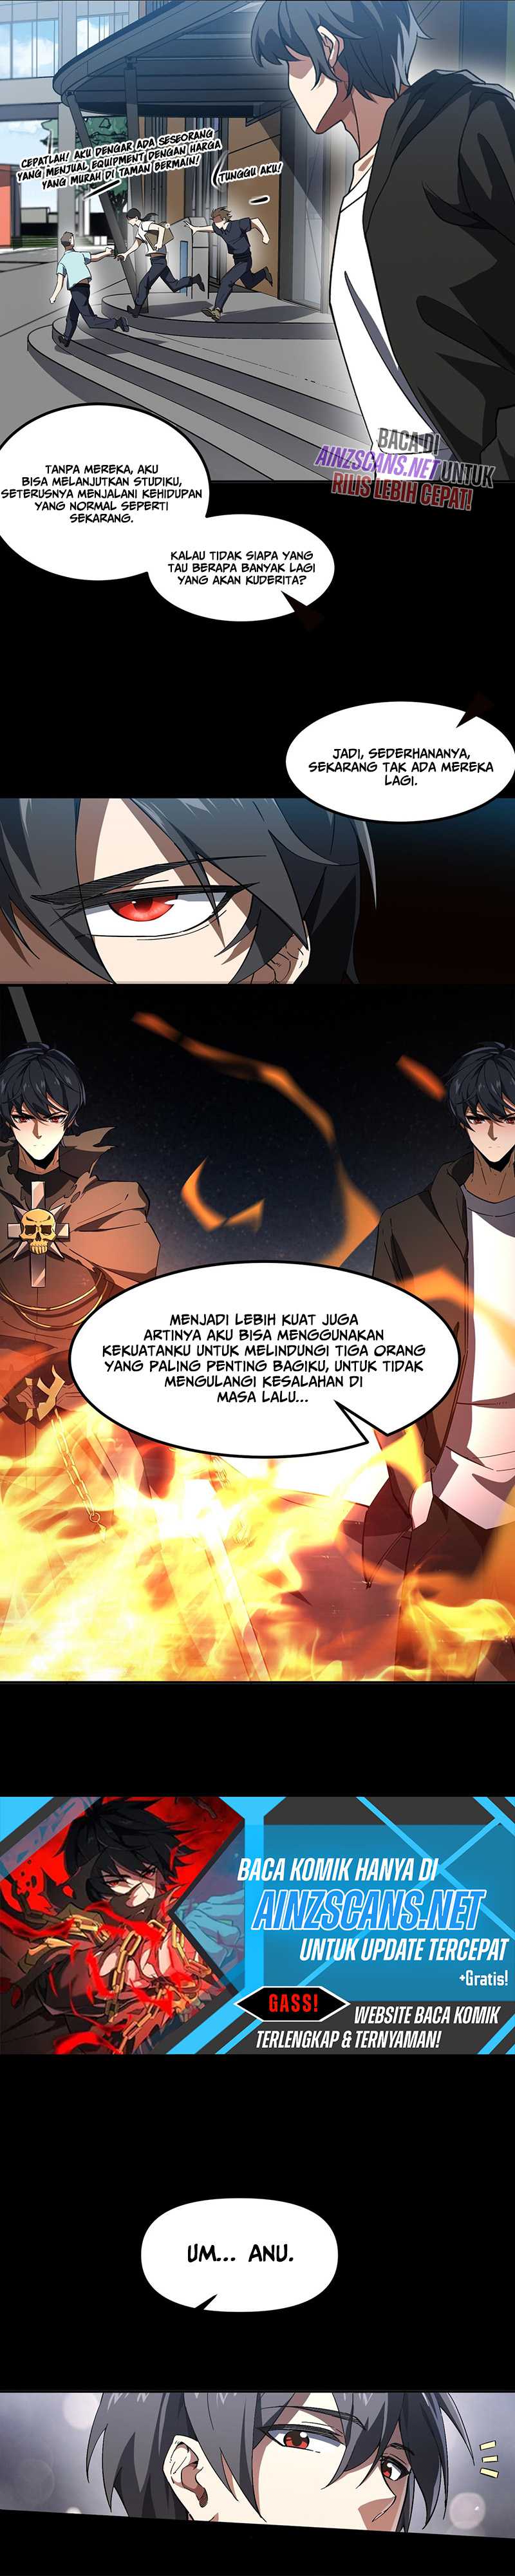 Catastrophic Priest Chapter 05